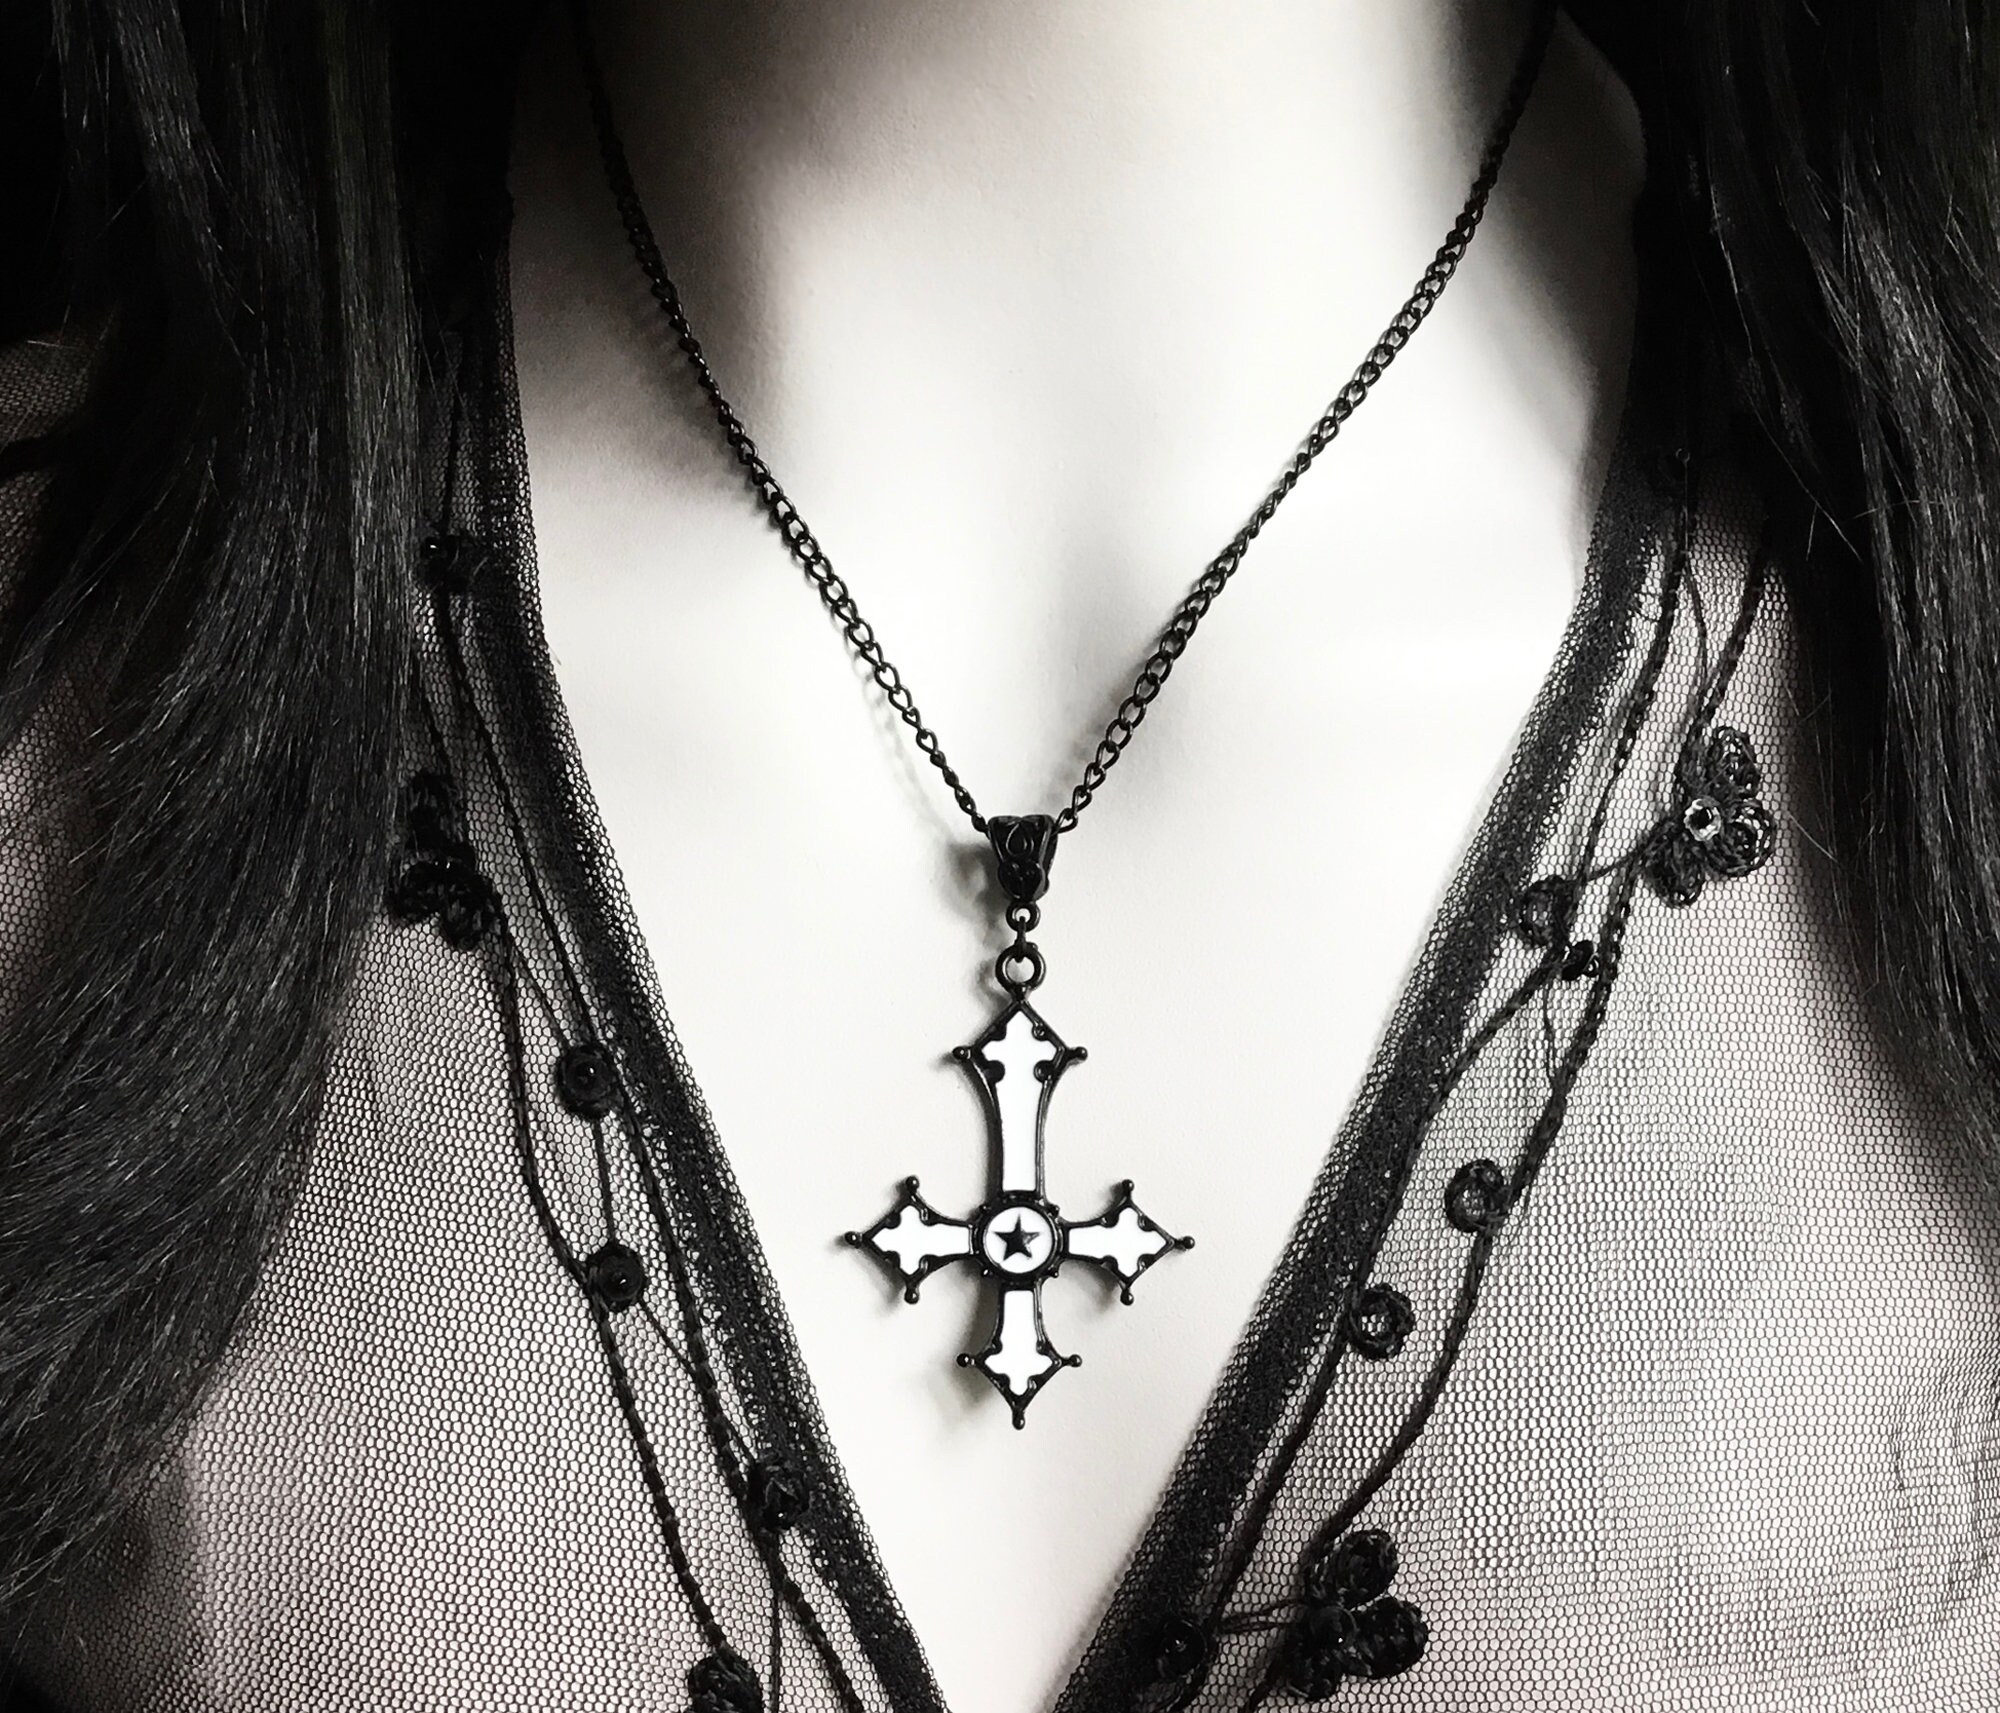 Black Pointed Cross Vampire Necklace, Gothic Jewelry, Statement Necklace,  Dagger Cross Pendant, Gothic Gift, Goth Necklace